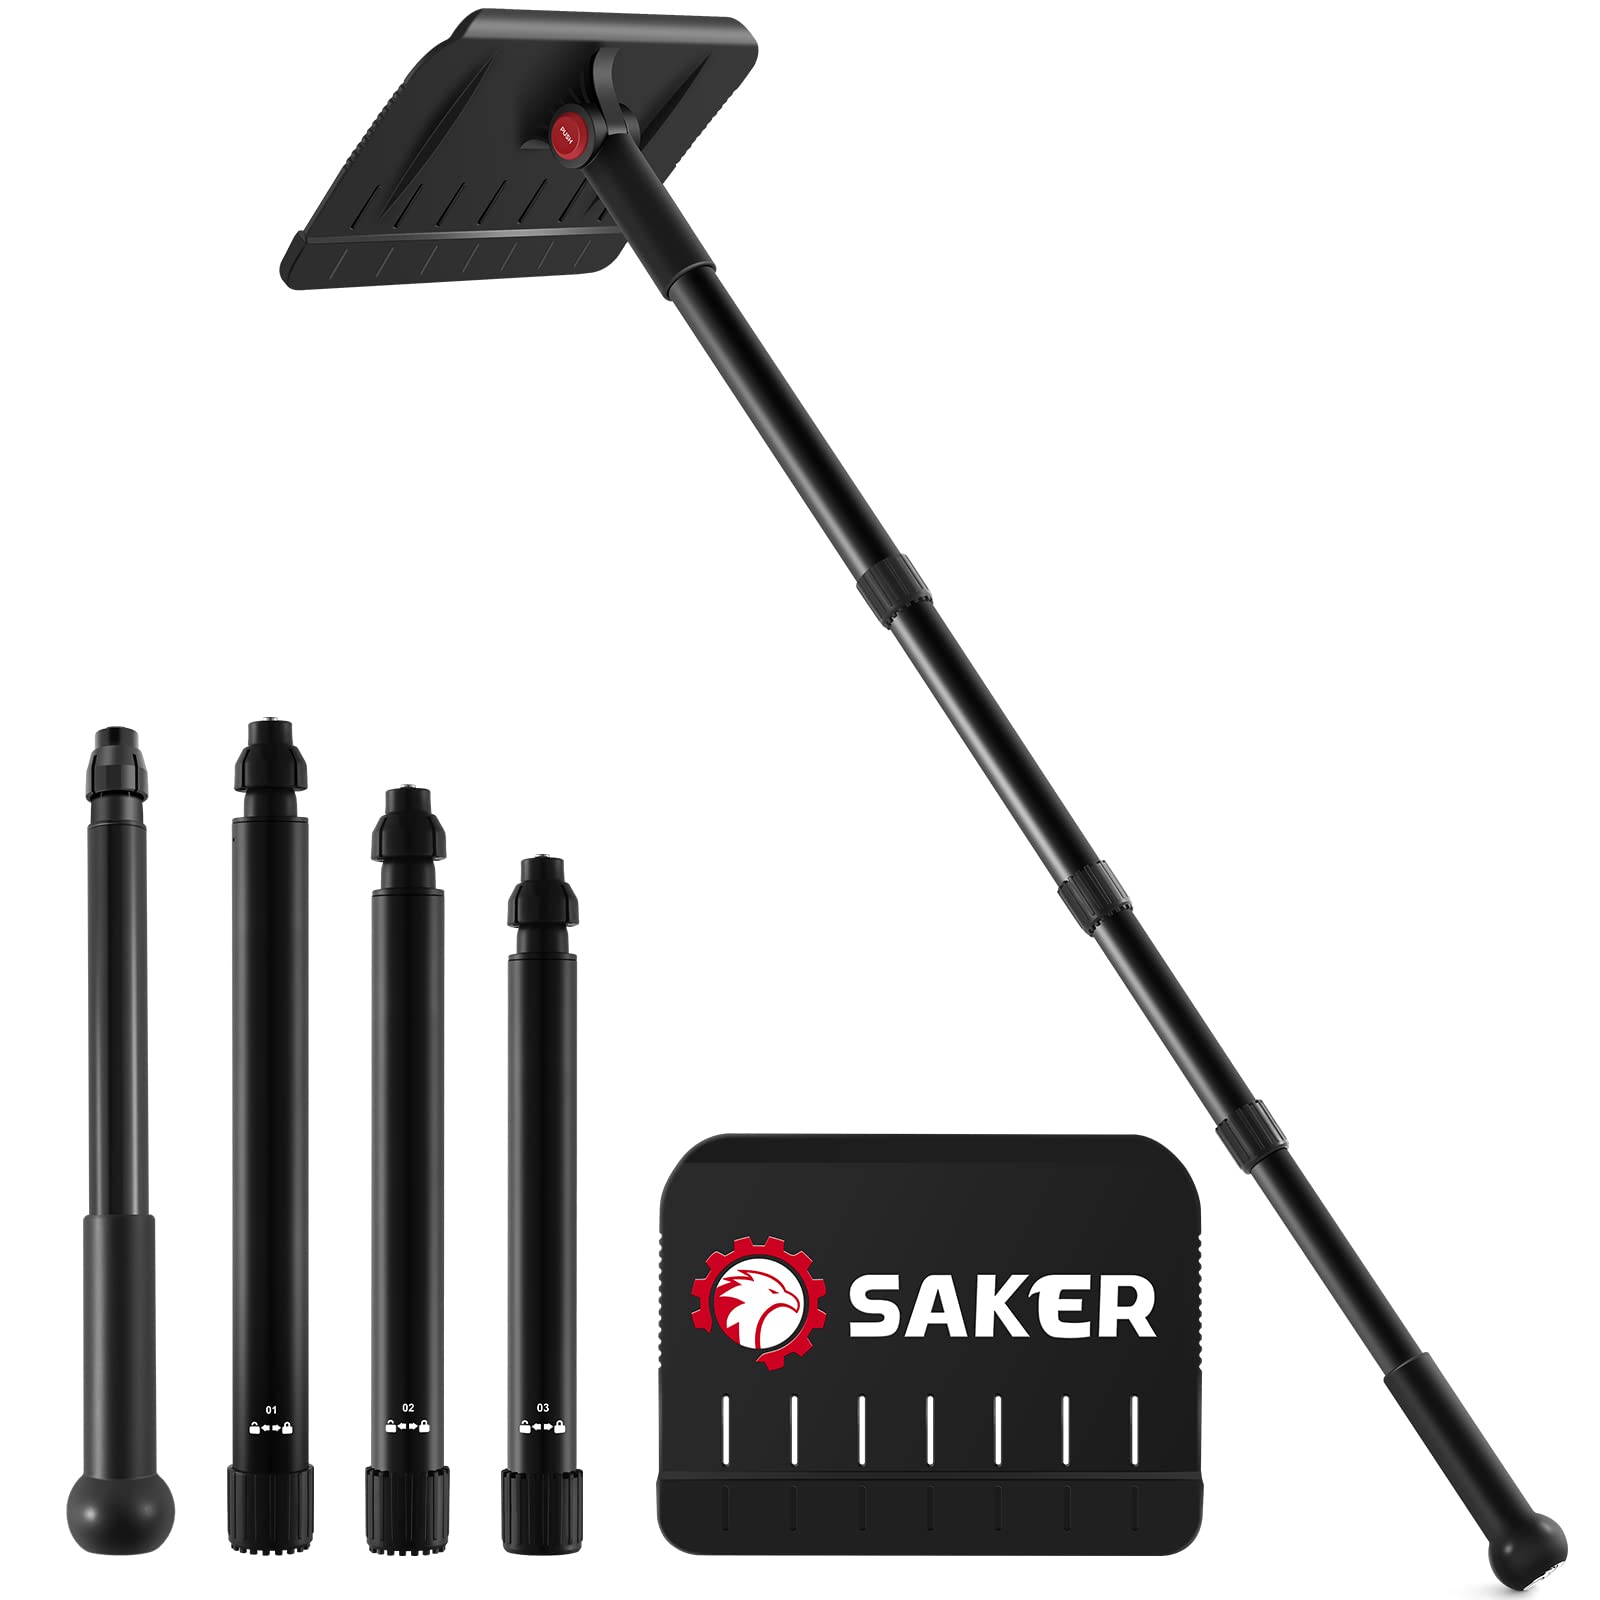 Saker collapsible Snow Removal & Ice Scraper Kit-Extendable Ice ScraperExtendable grip Snow Scraper, Magical car Windshield Ice